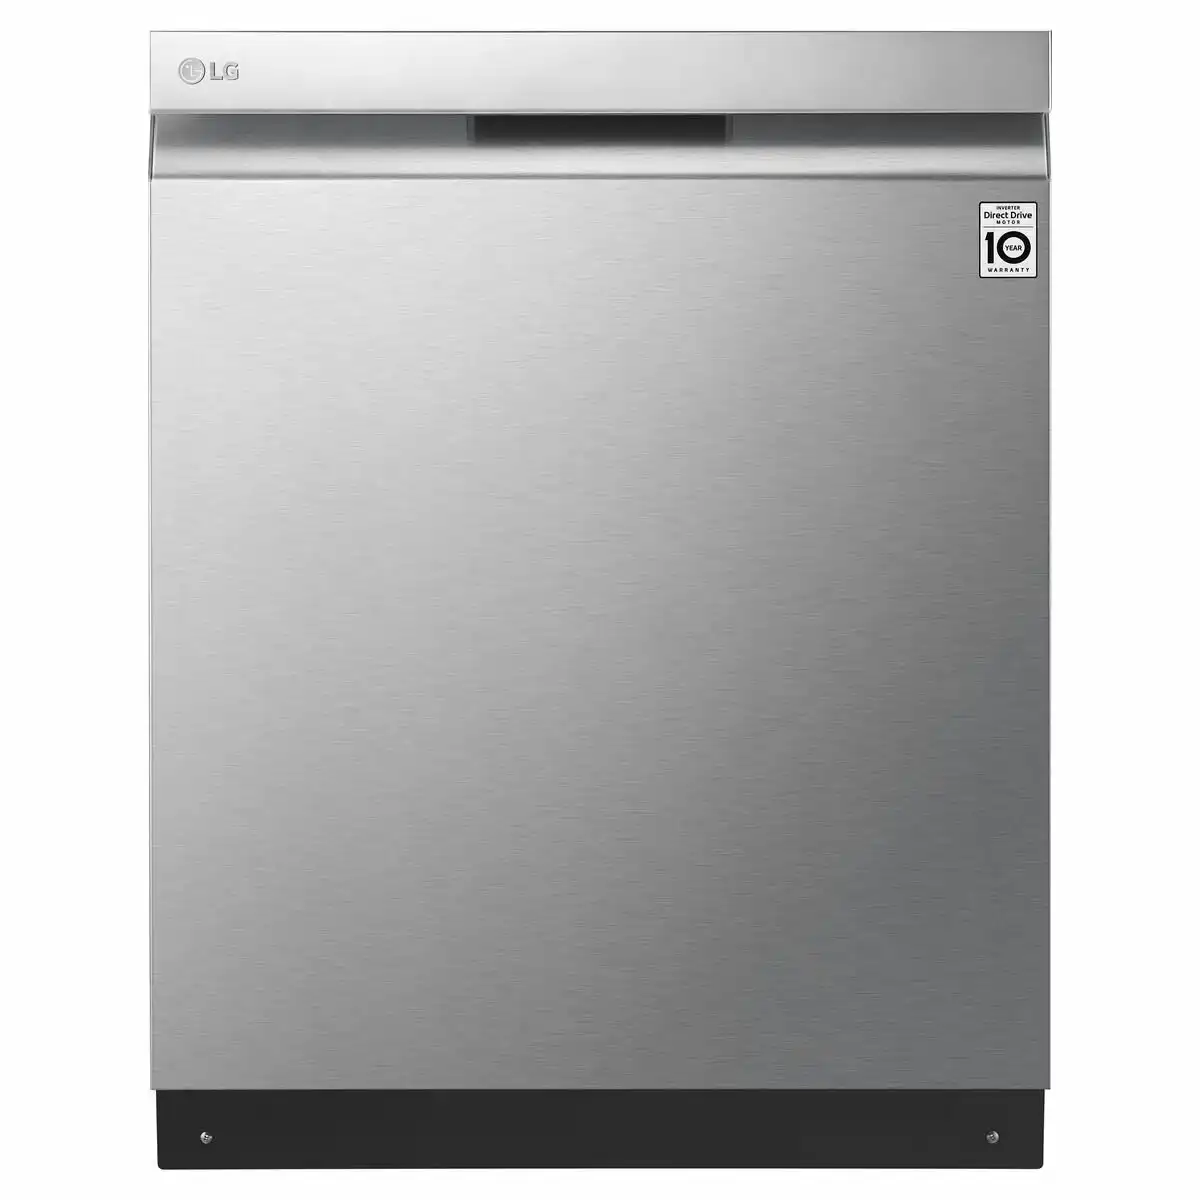 LG 15 Place QuadWash Built Under Dishwasher in Brushed Steel Finish with TrueSteam